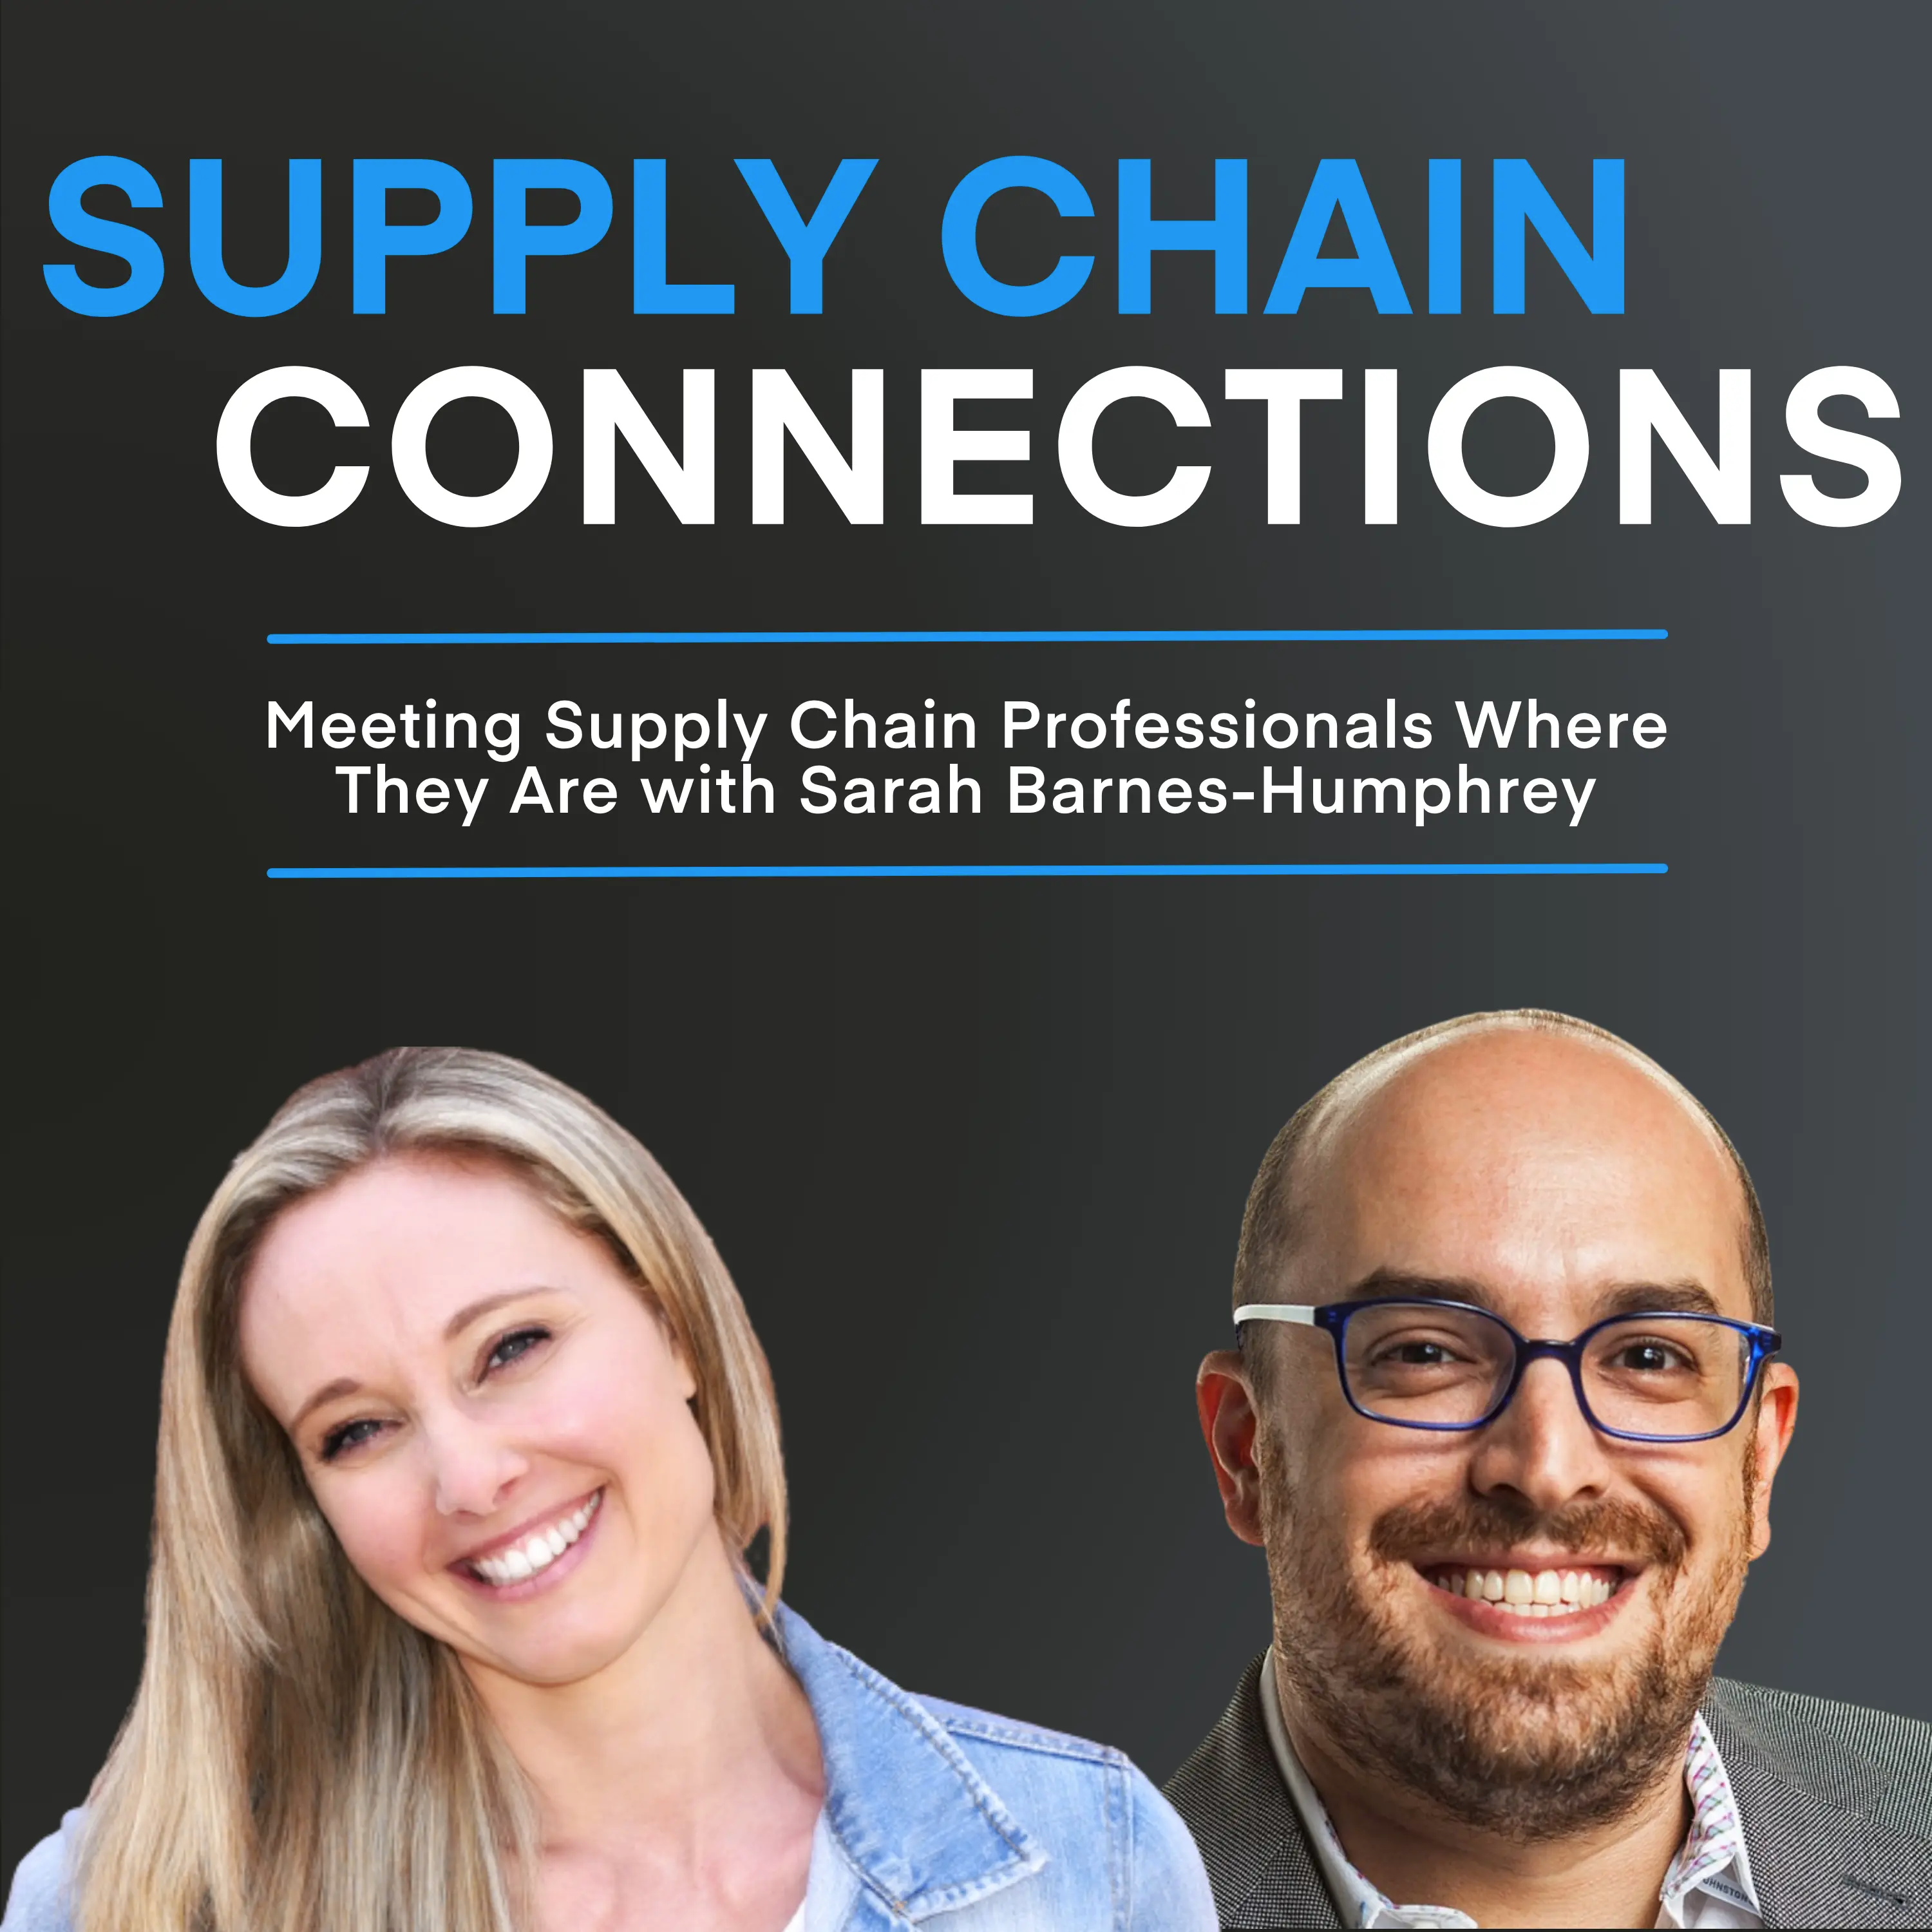 Sarah Barnes-Humphrey, Let's Talk Supply Chain - Supply Chain Connections Podcast